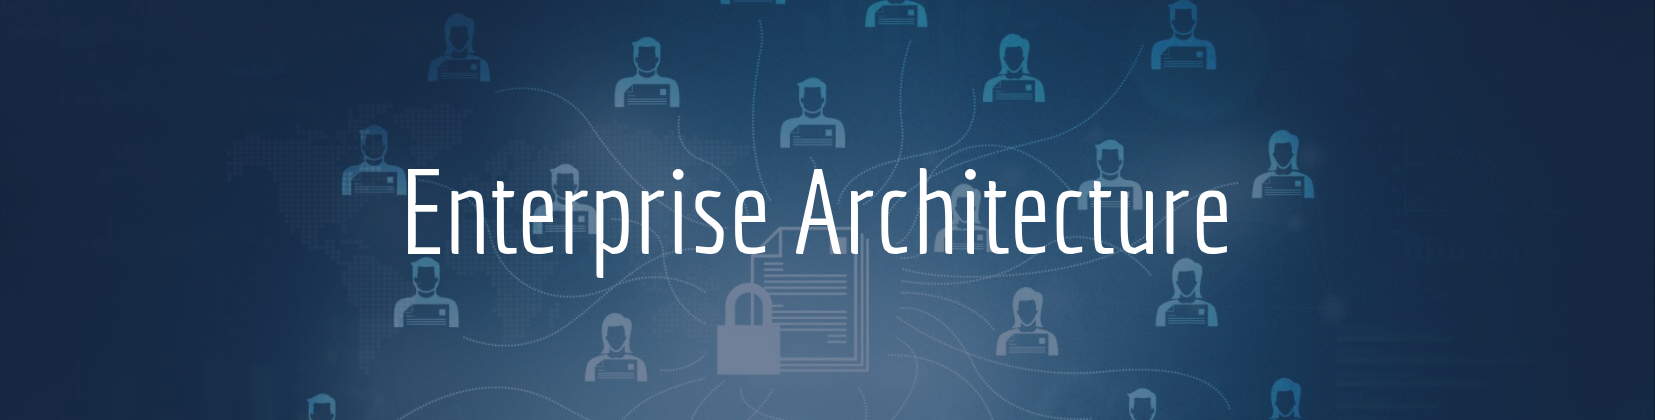 Enterprise Architecture The Enterprise Architecture department provides a holistic approach to resource planning, provide insight and knowledge in developing and evaluating enterprise infrastructure designs, and plan strategies for technological growth to achieve current and future objectives.